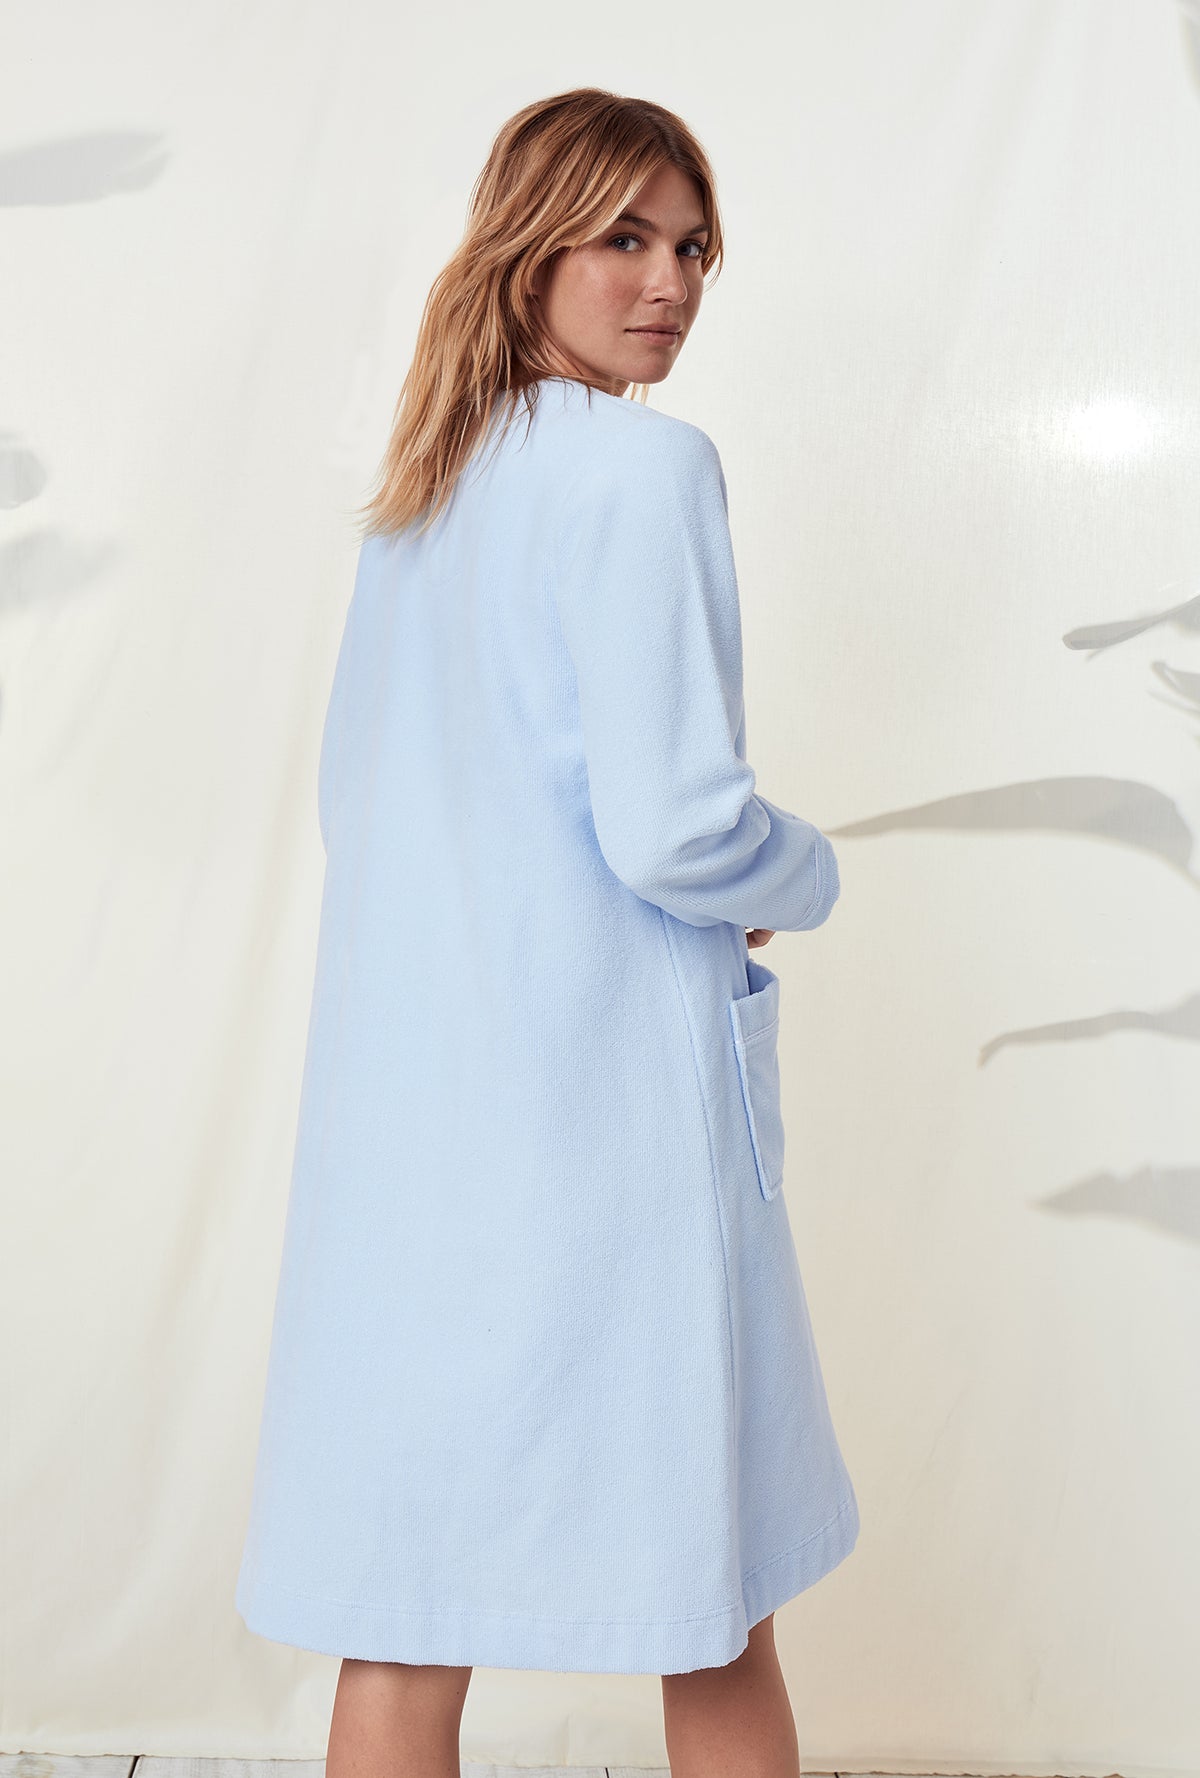 A lady wearing a terry blue long sleeve spa soft zip robe